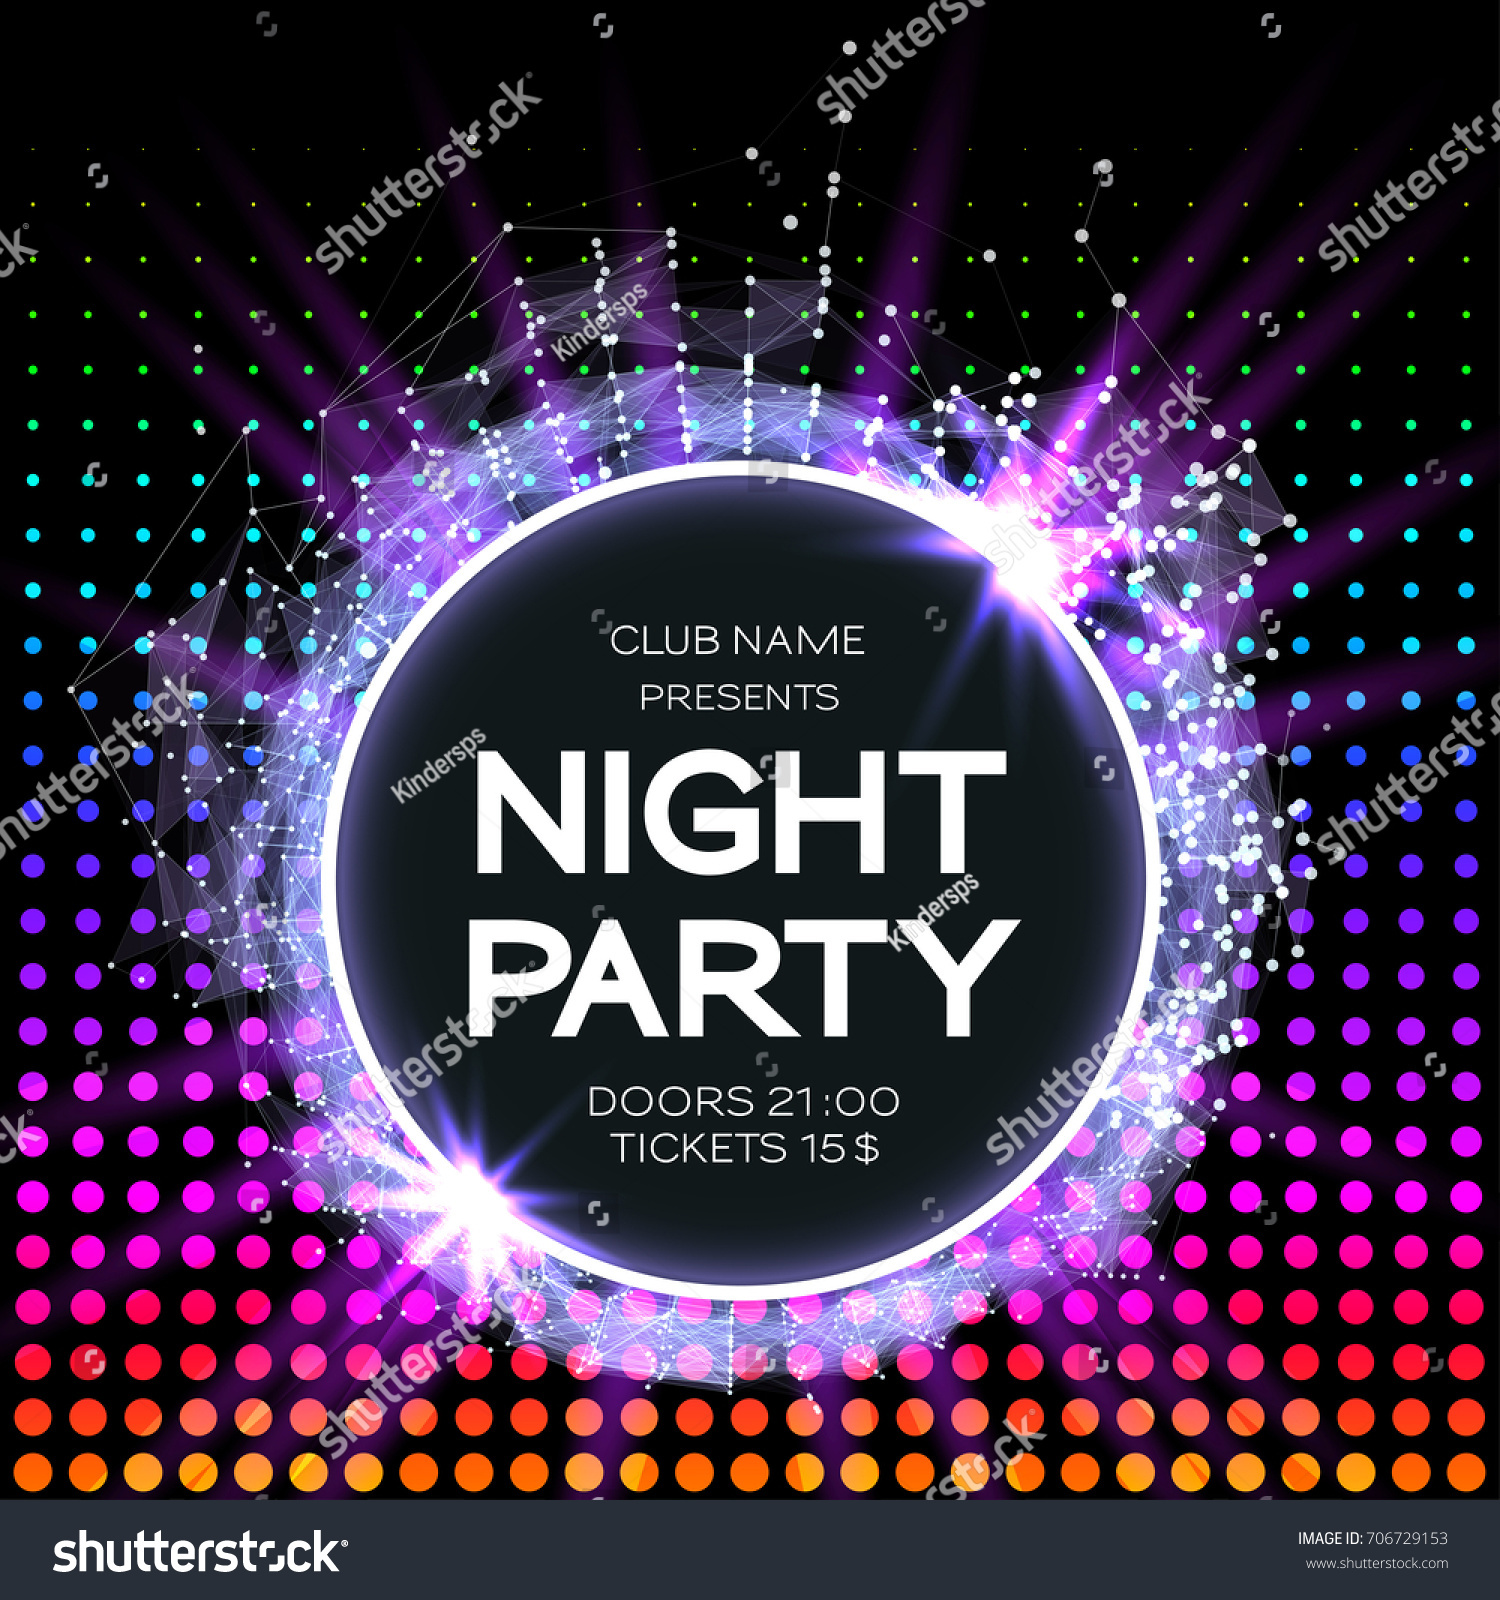 Night Party Dance Poster Background Event Stock Vector 706729153